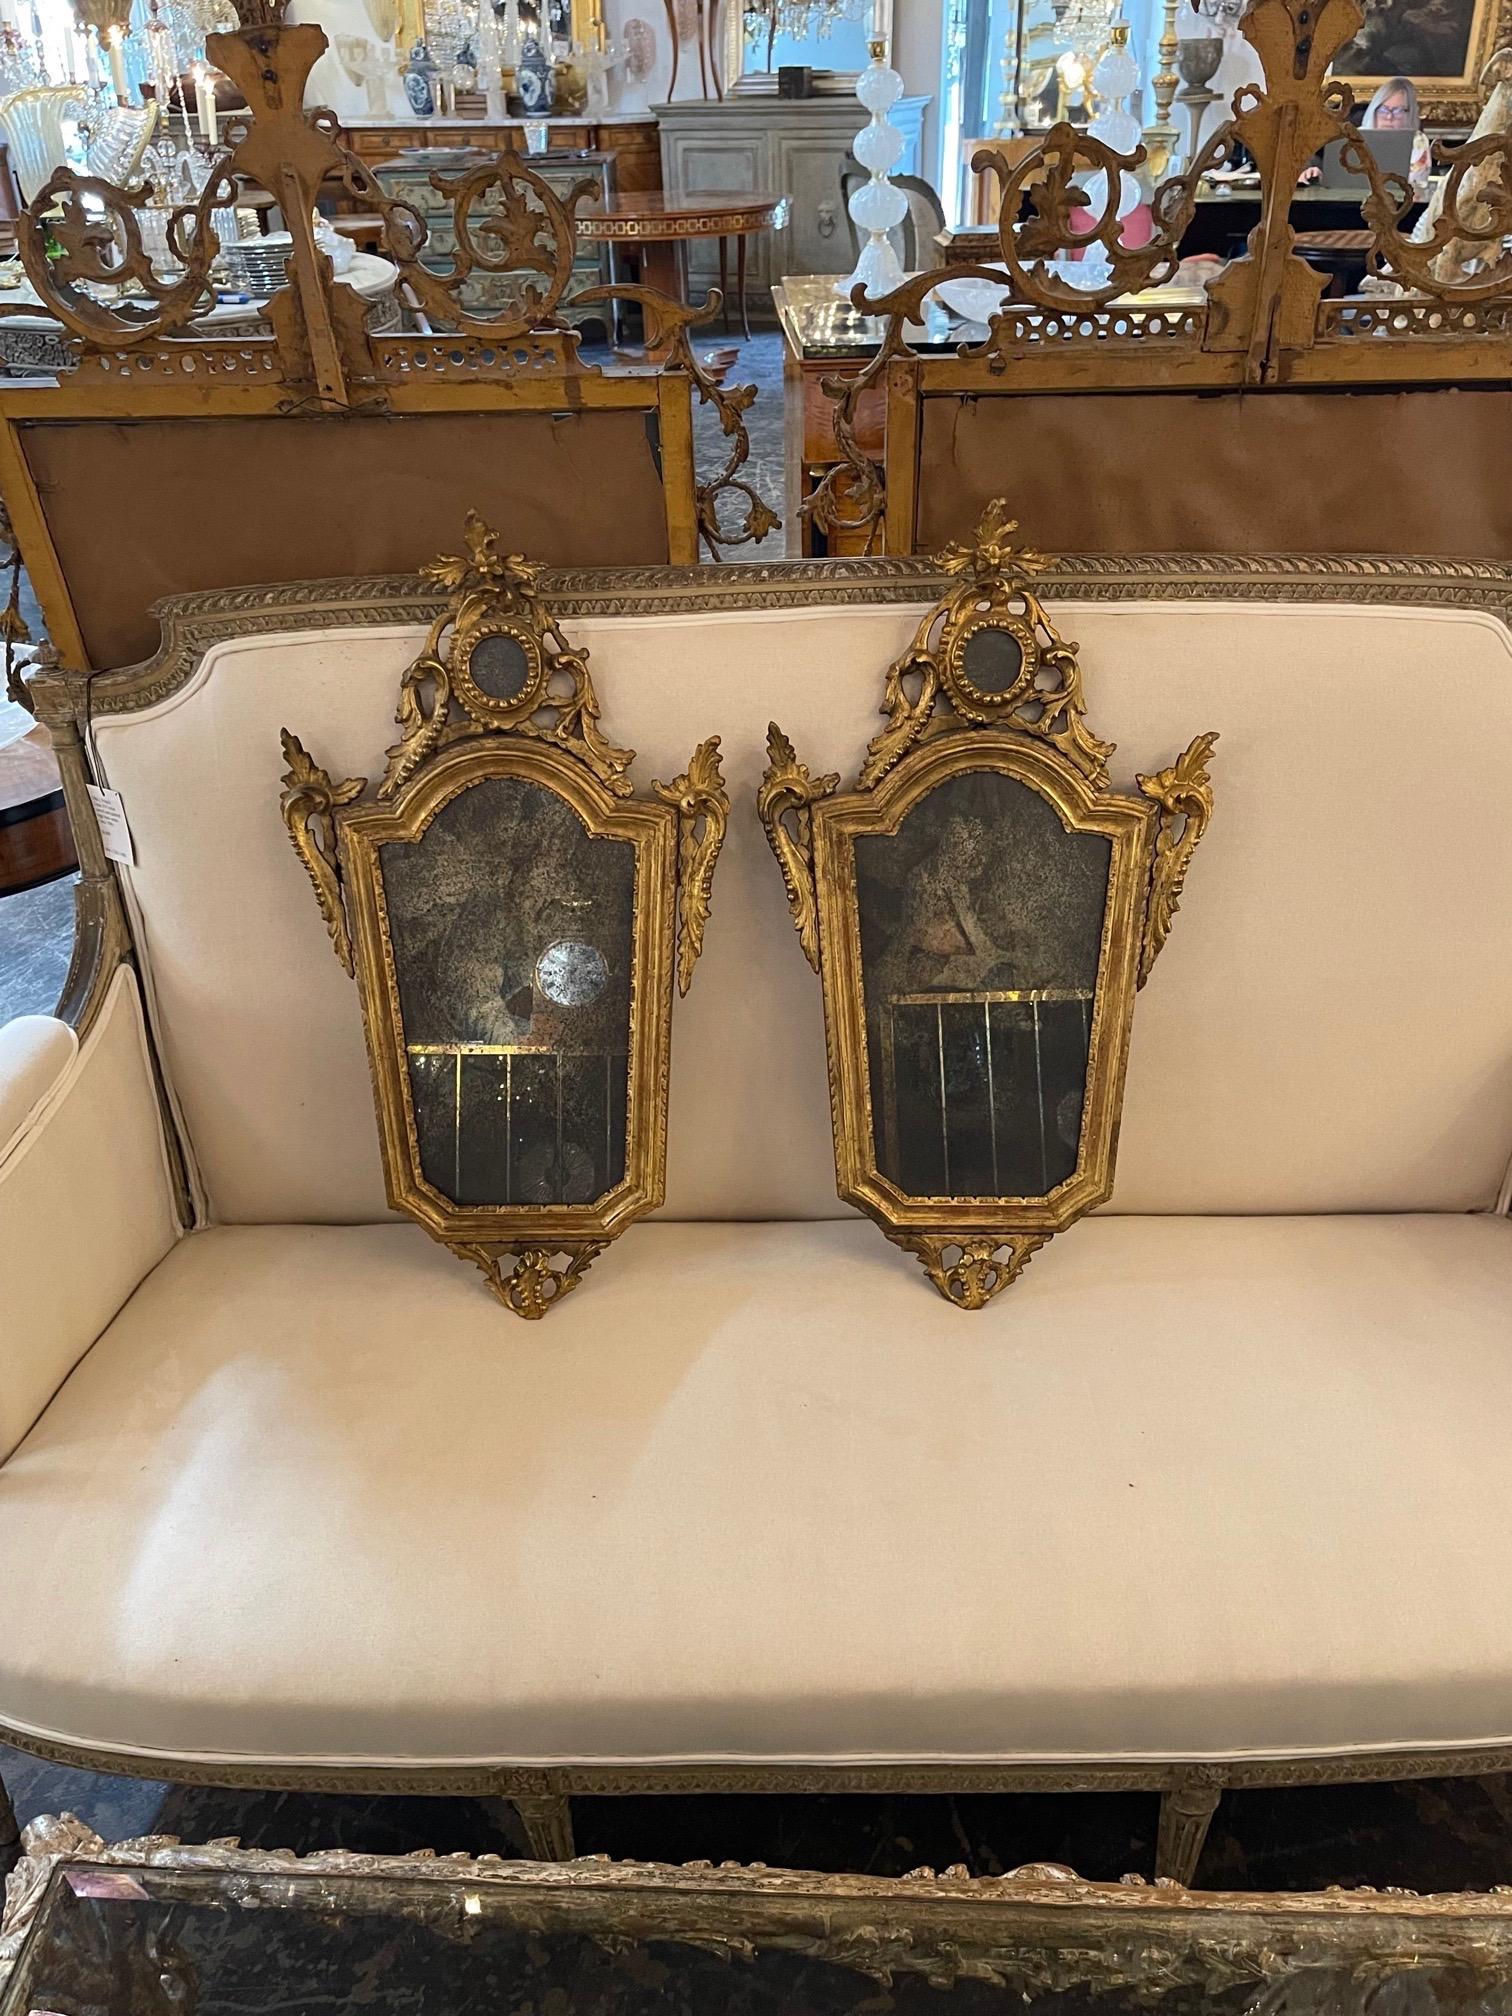 Exquisite pair of 18th century Italian carved giltwood mirrors. Very fine carvings and lovely gilt finish. Very special!